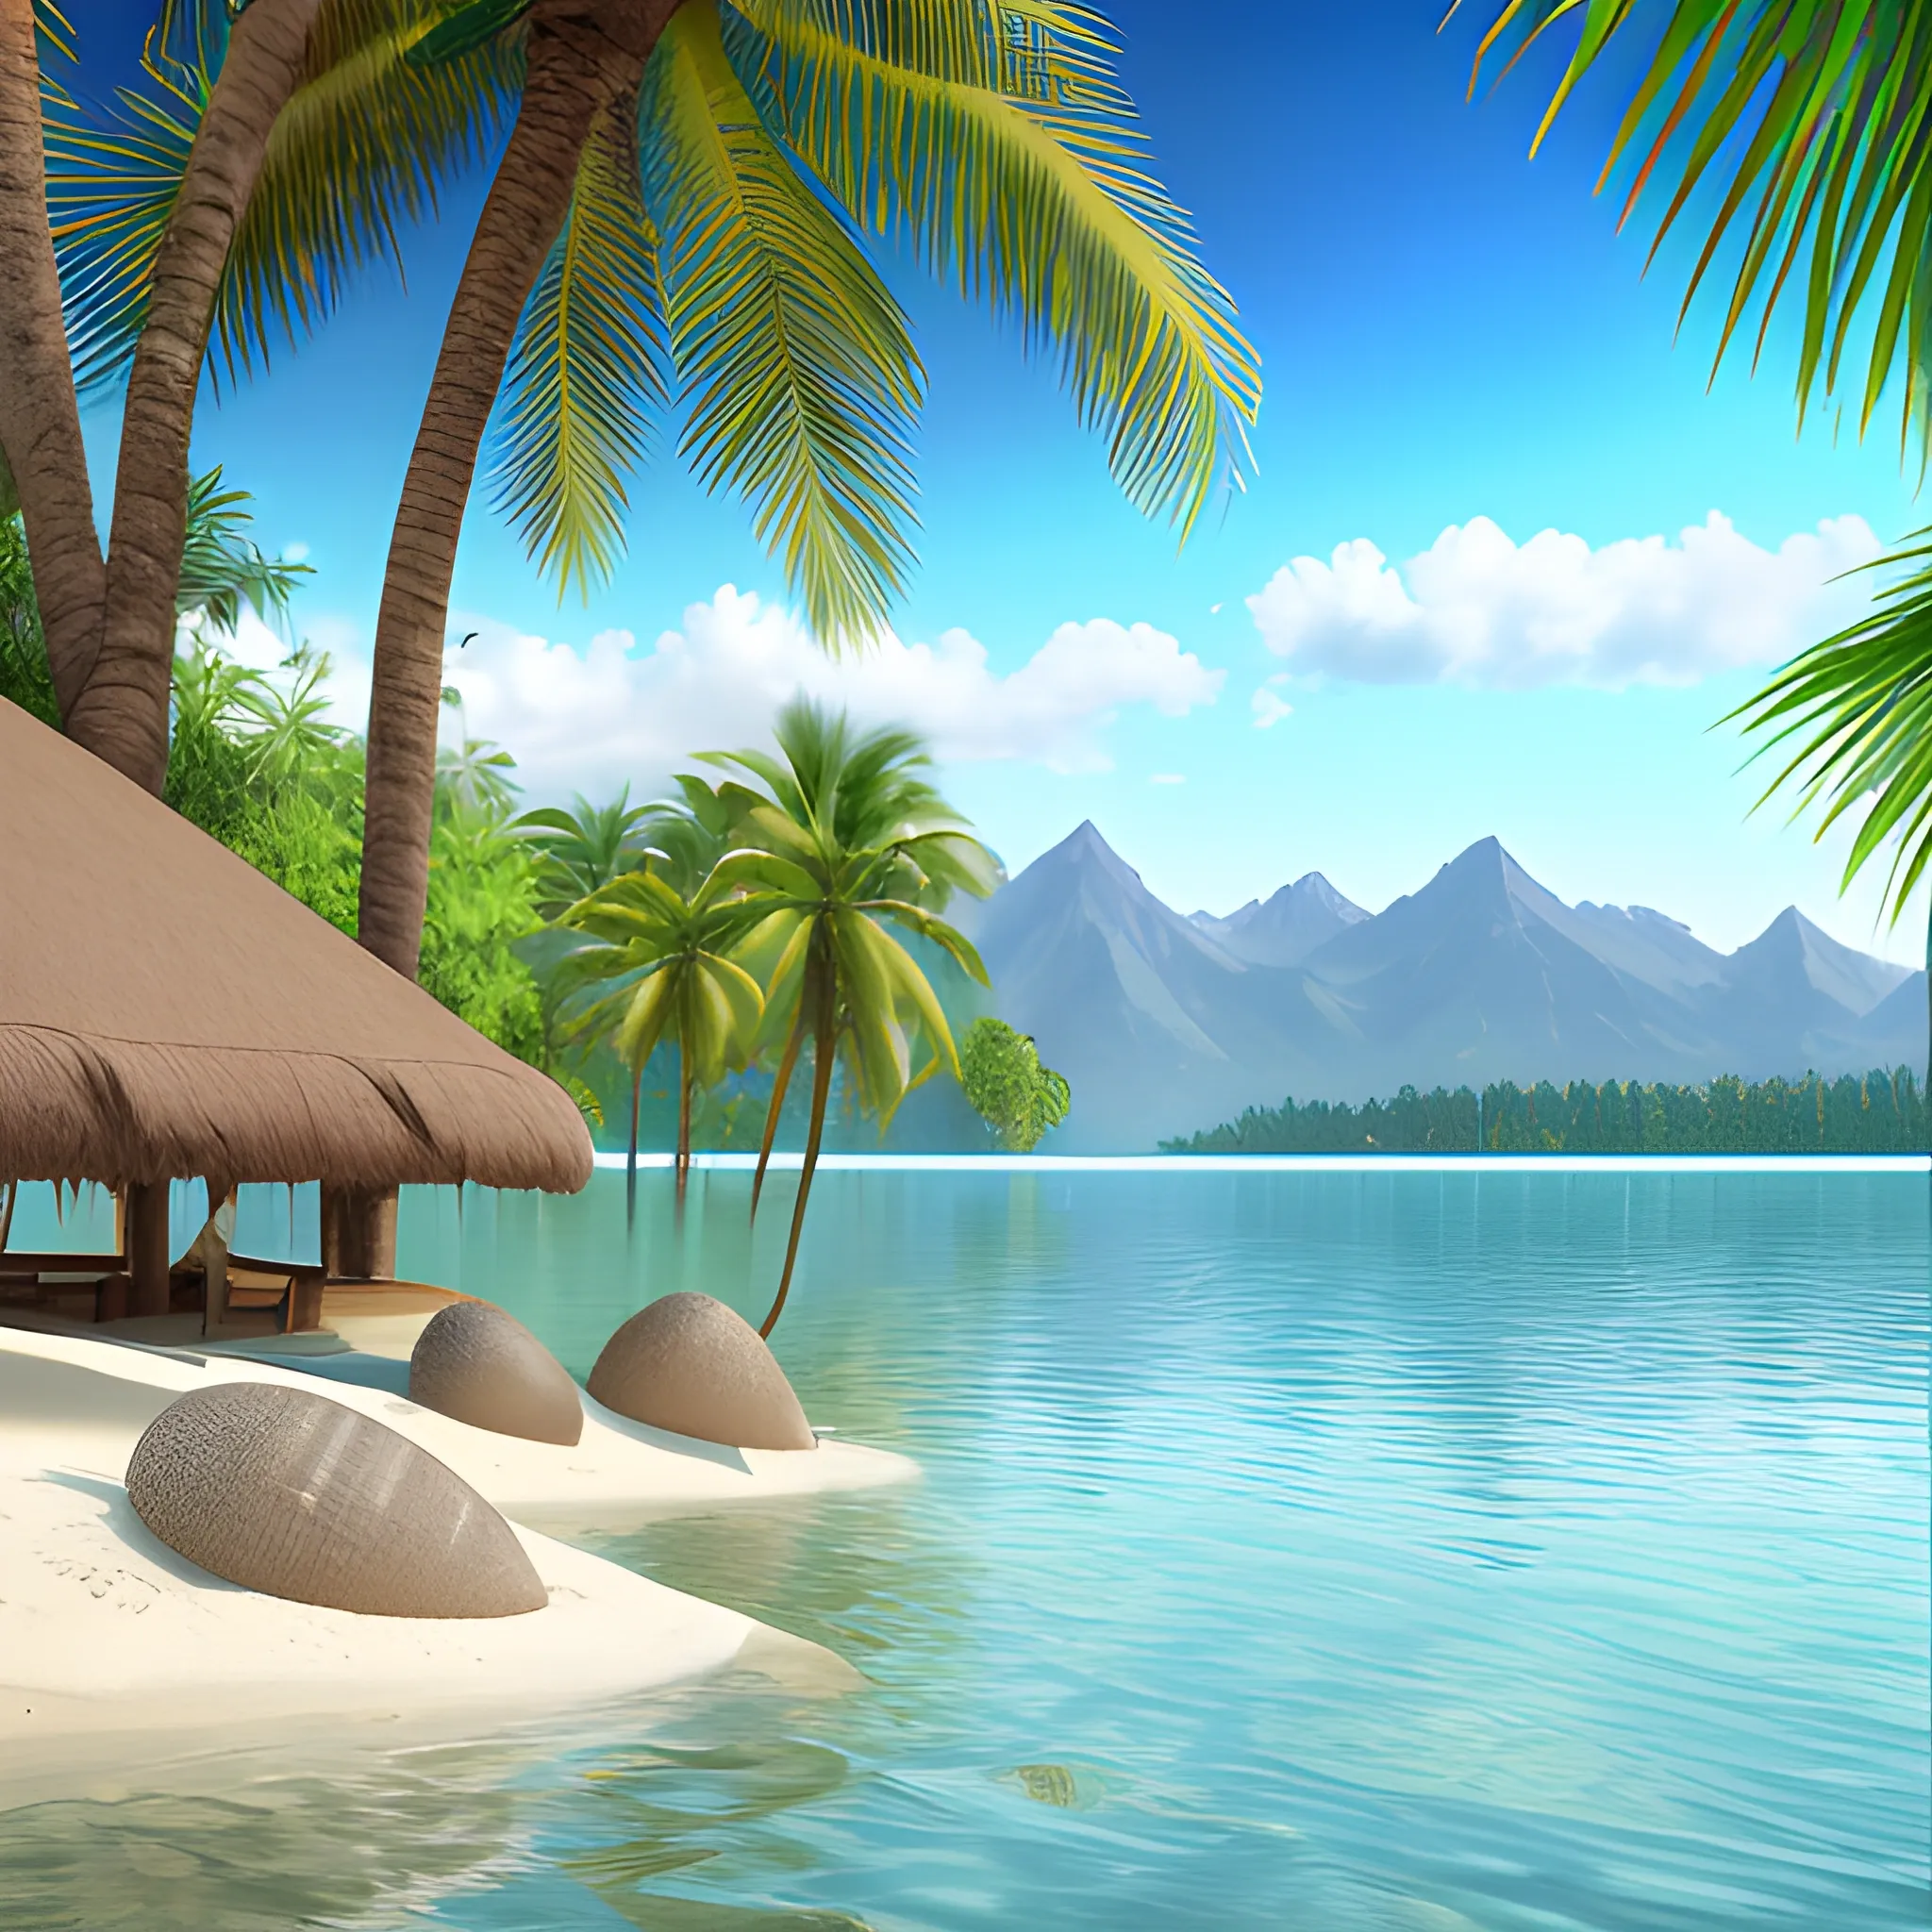 mountains lake water (photorealistic) 8k, beach rest coconuts on palm trees (photorealistic) 8k, relax "width": 1900,
"height": 1900,
